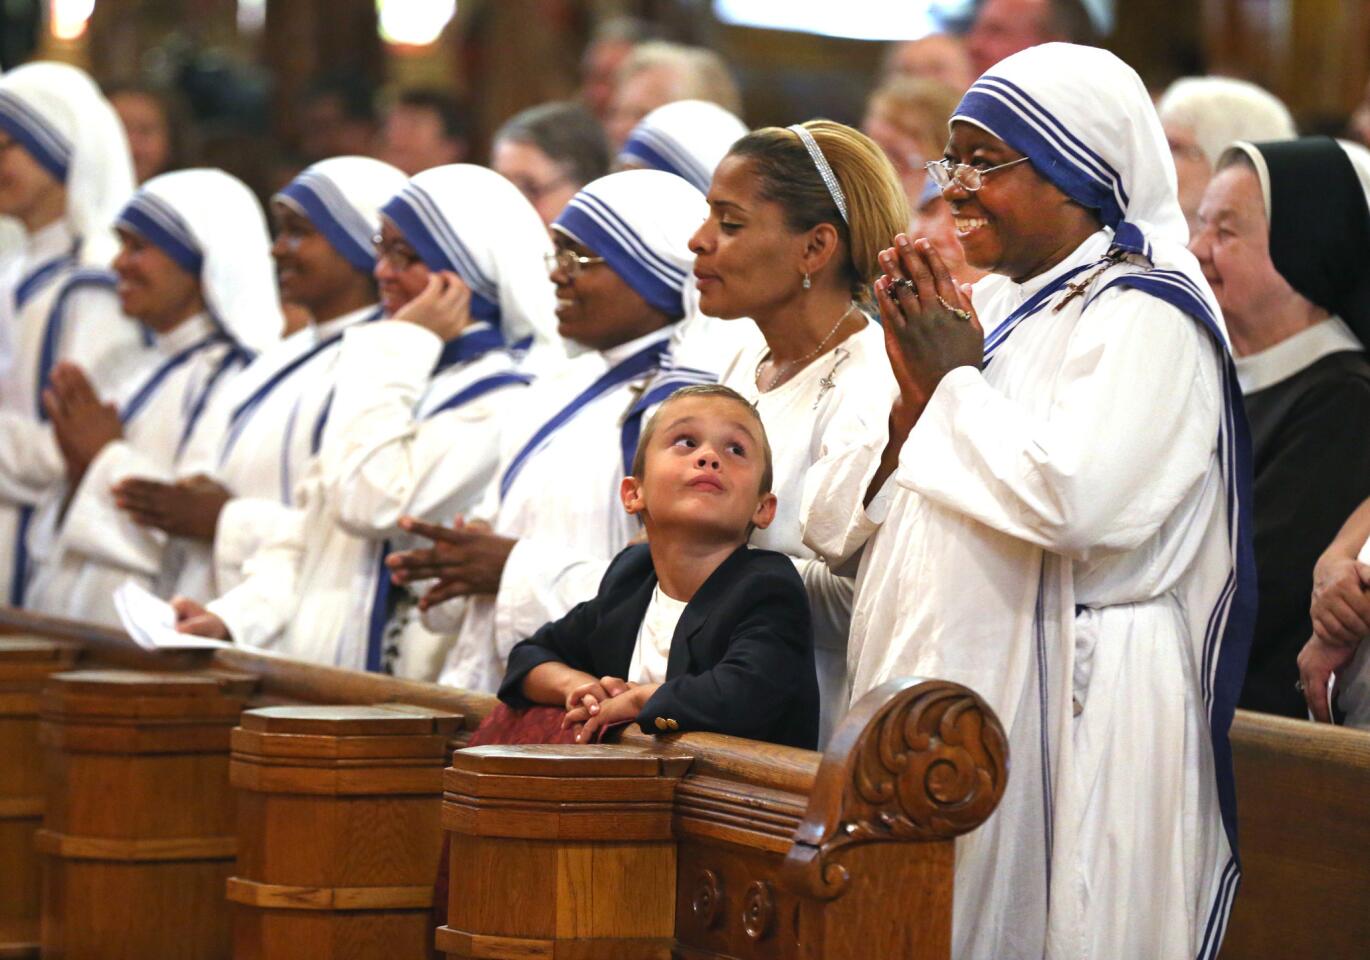 Anthony McElroy, 7, looks up at sister Jesusla of the Missionaries of Charity during a Mass to celebrate the canonization of Mother Teresa at St. John Cantius Parish in Chicago on Sept. 4, 2016.